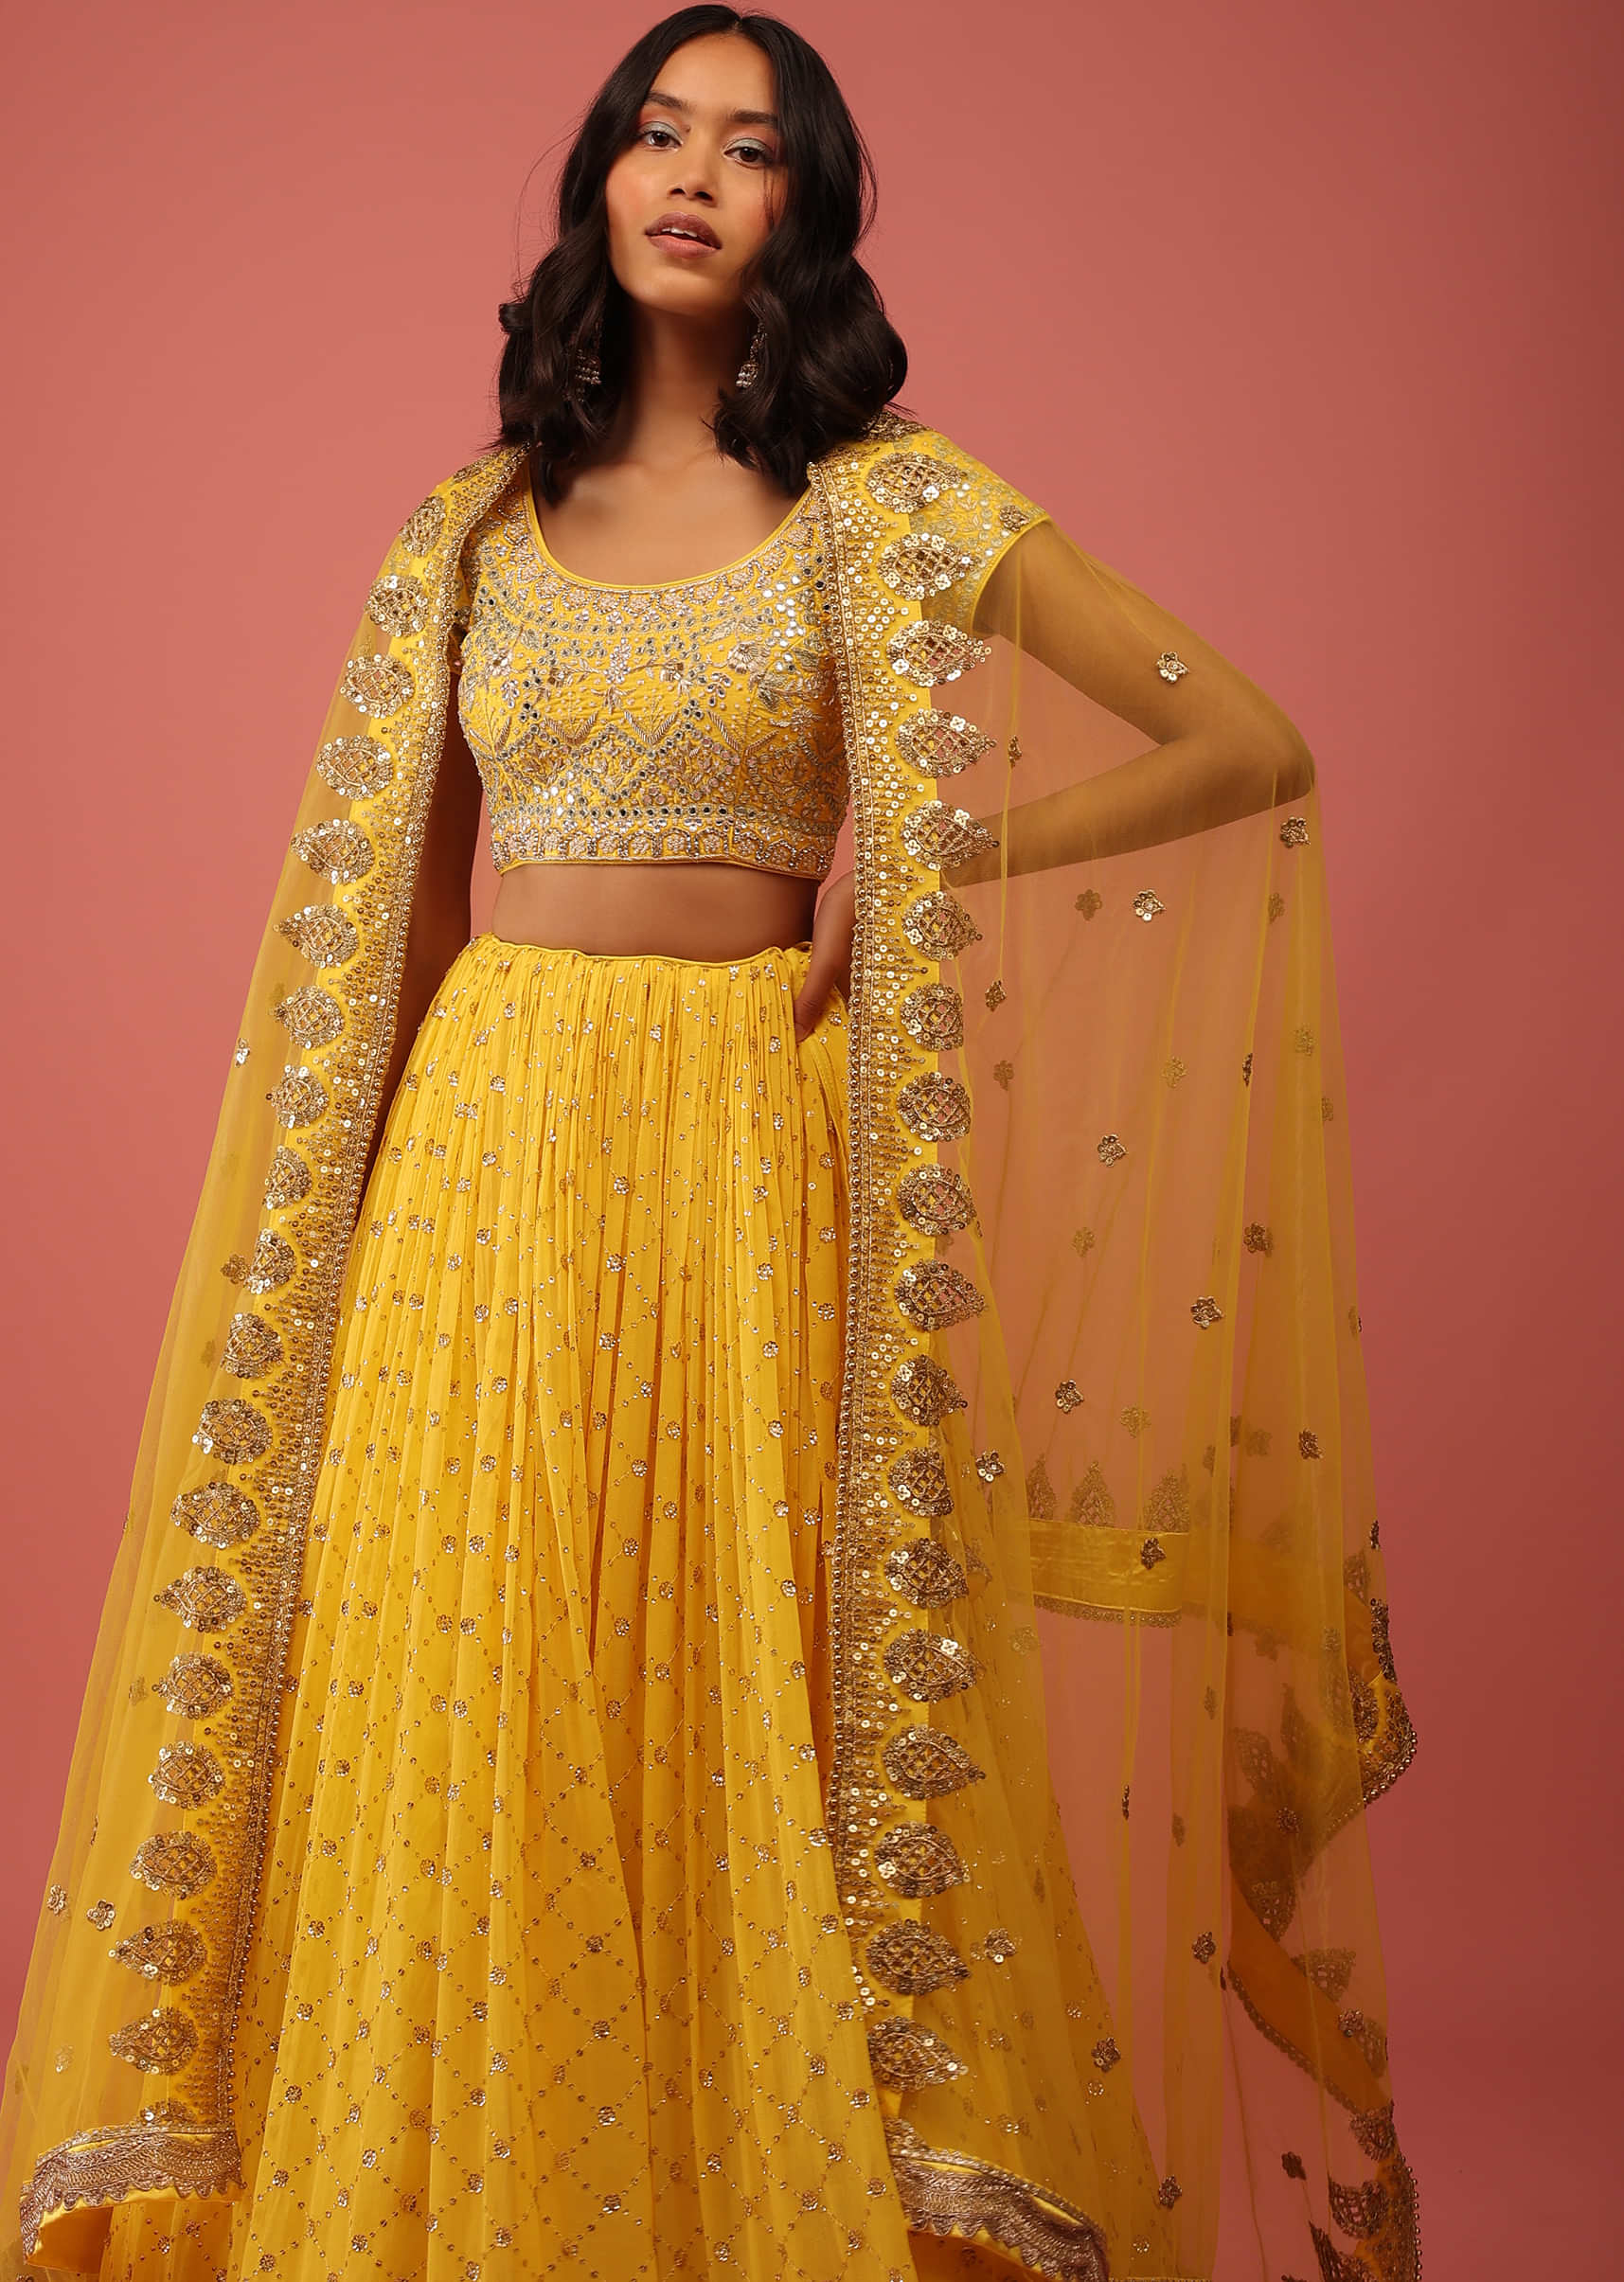 Daffodil Yellow Lehenga Choli With Sequins Embroidered Mesh Jaal And Floral Details